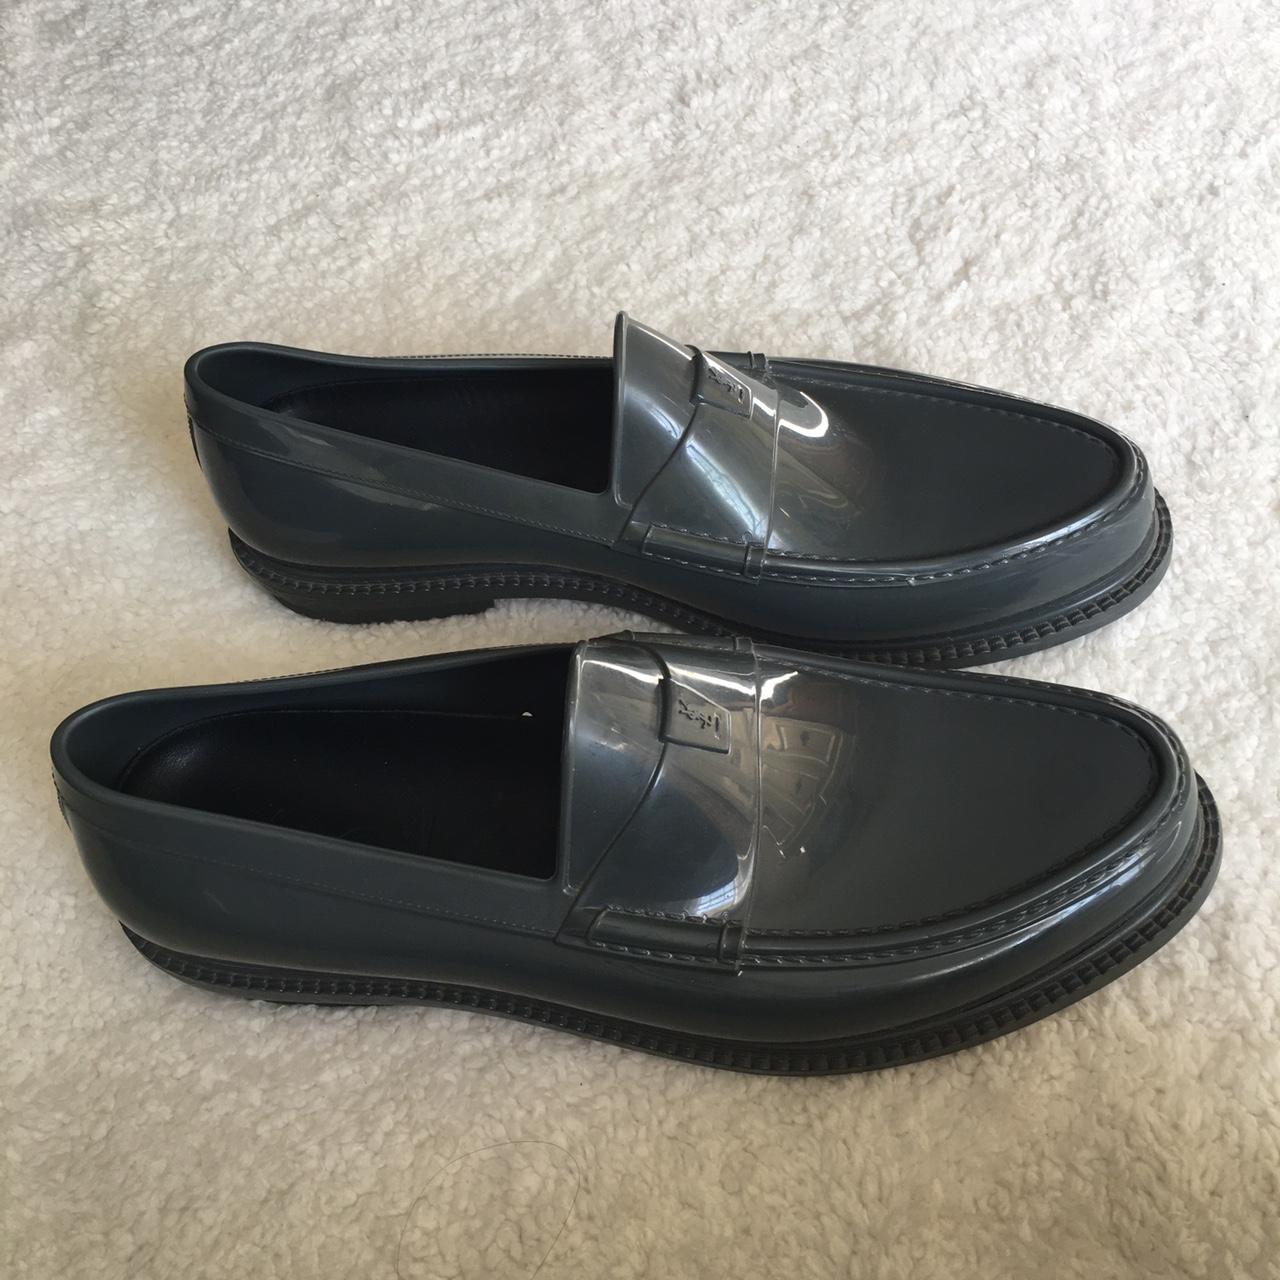 Yves Saint Laurent “Kennedy Show” rubber loafers in... - Depop